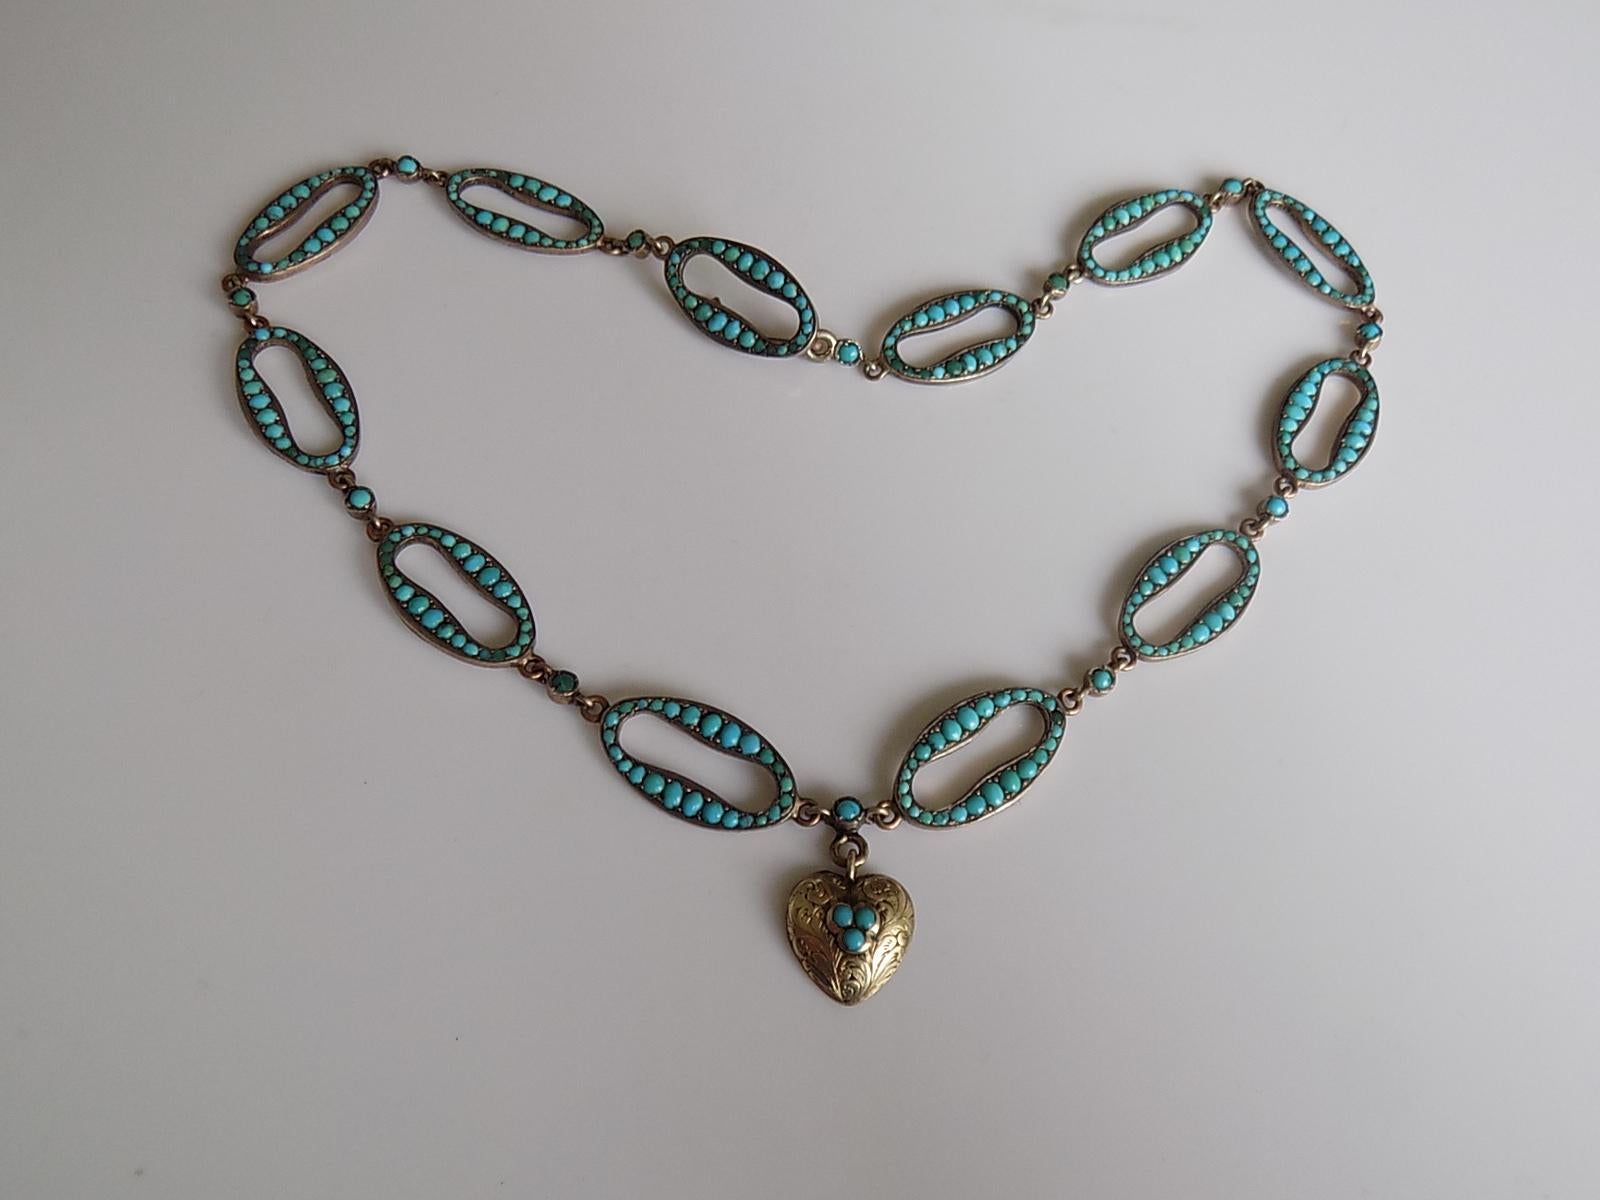 An Extremely rare and outstanding looking Victorian c.1880 Silver Gilt and Turquoise link designed necklace with a heart shaped pendant and hook fastener. The Turquoise stones in pave setting. Ideal as everyday or special occasion piece. 
Total